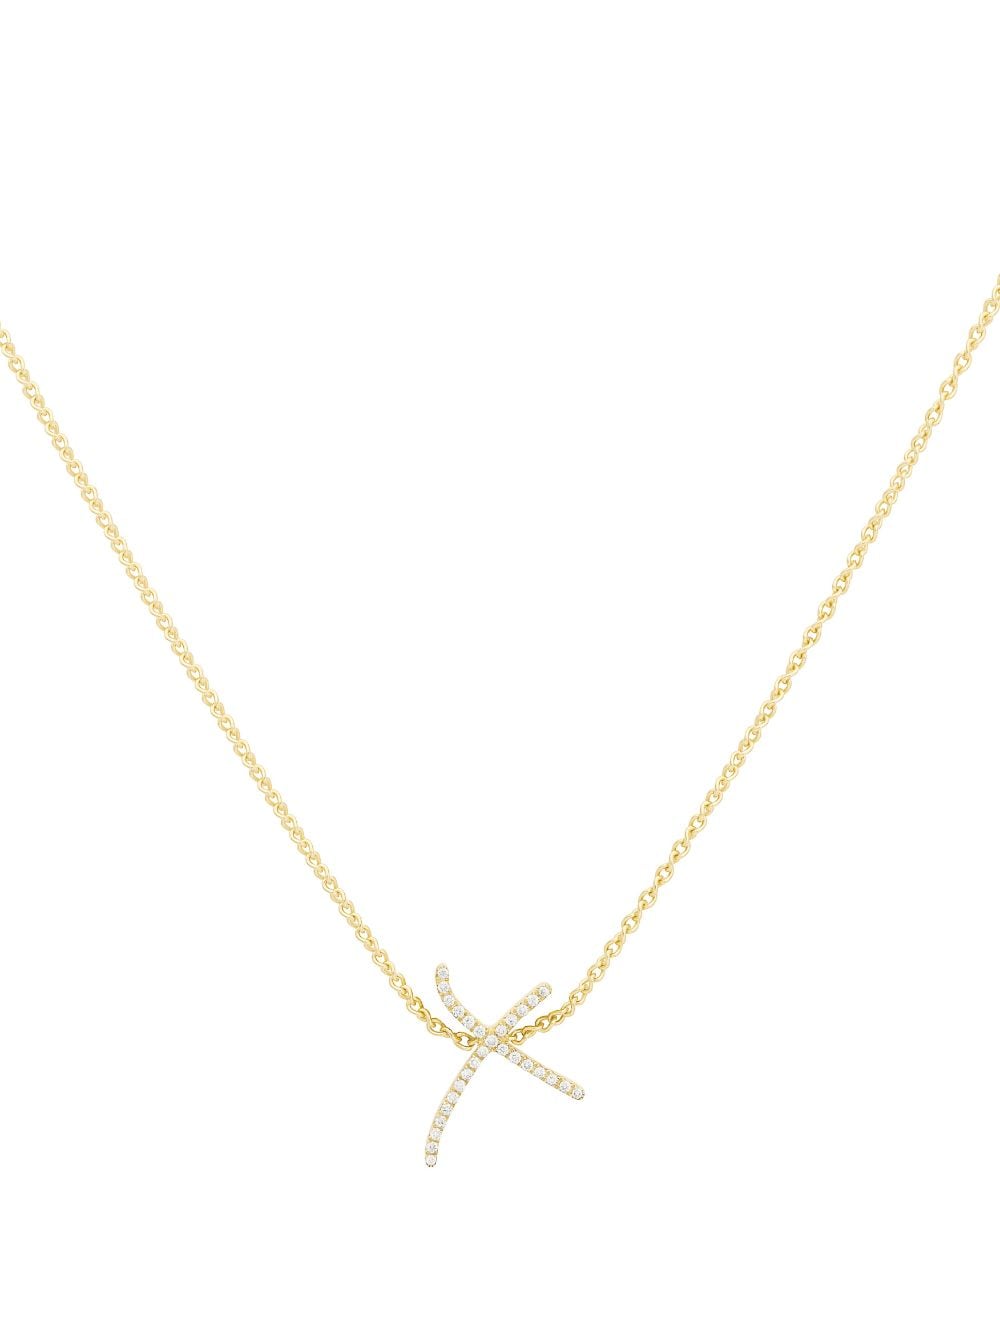 Stephen Webster 18kt yellow gold I Promise to Love You Neon Kiss diamond pendant necklace